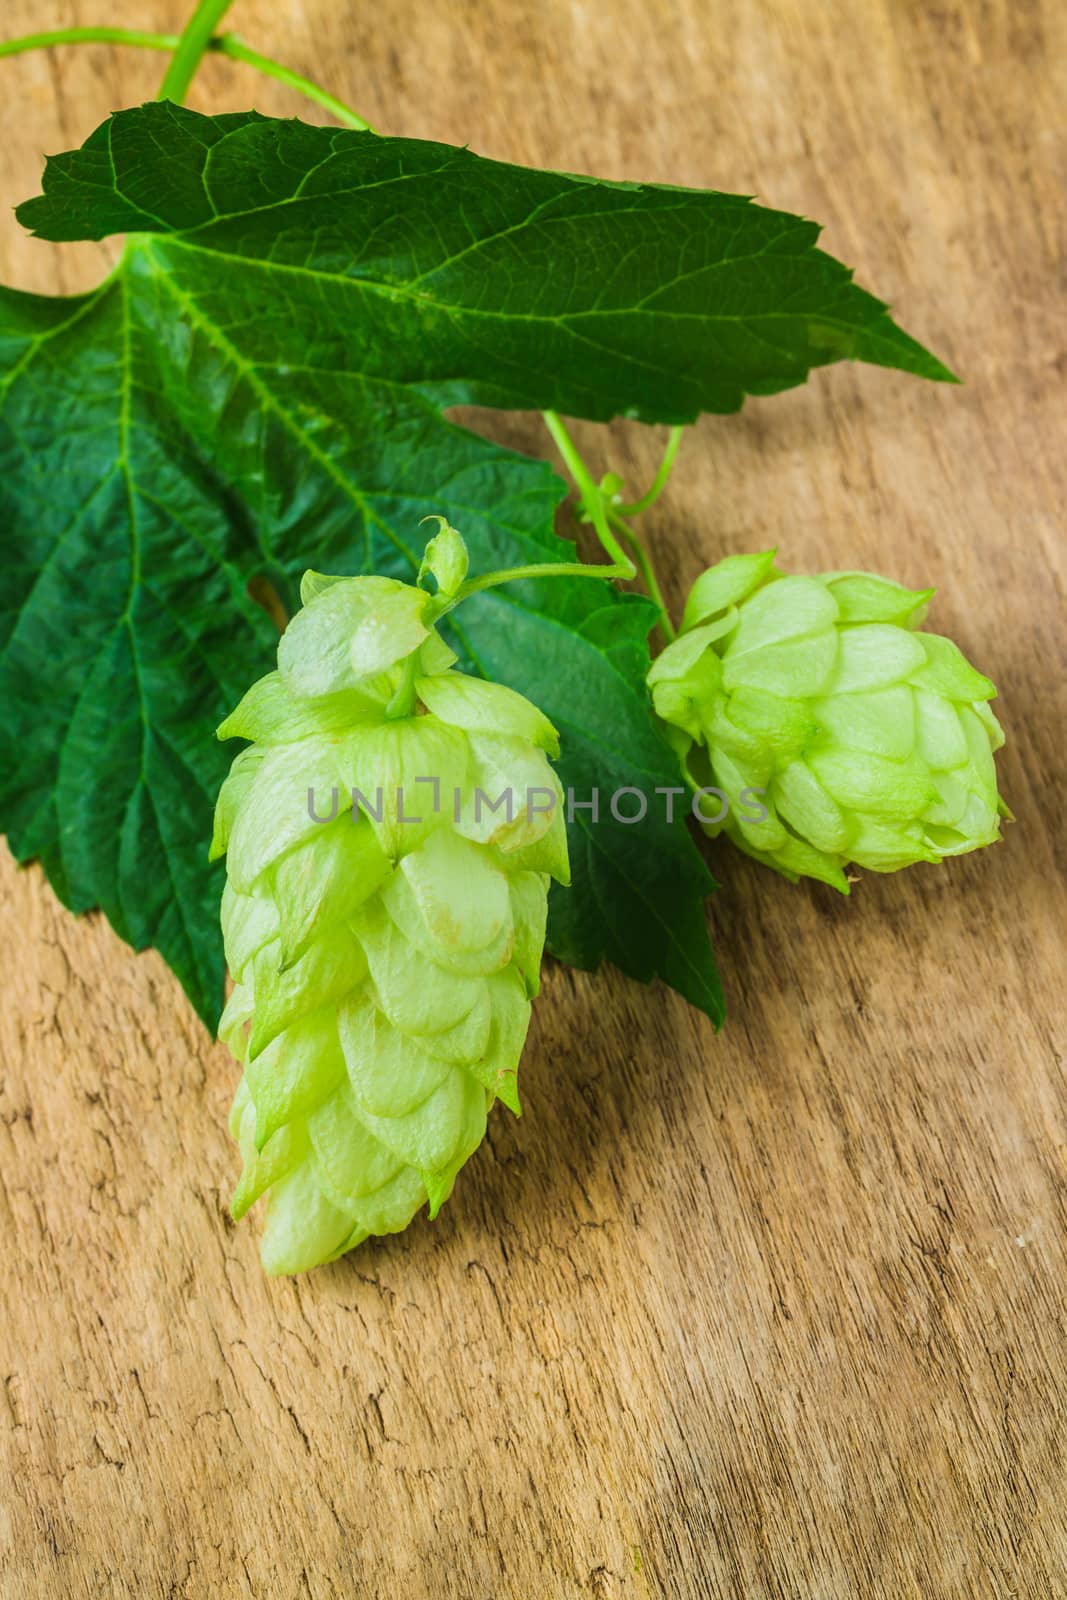 Hops for beer production in the background of the old board